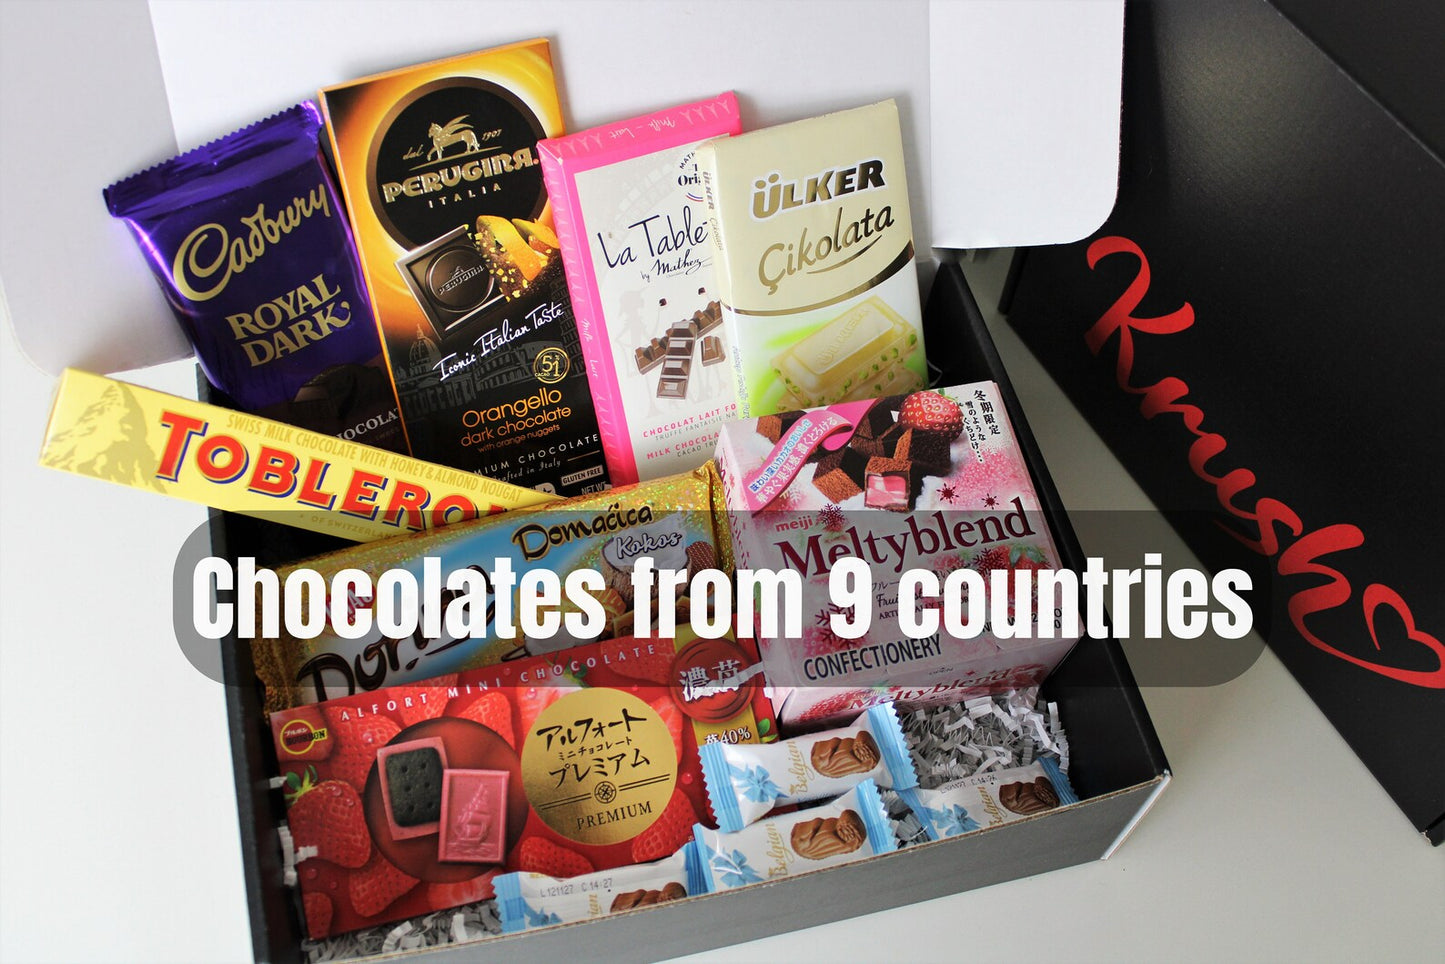 World Chocolates Tasting Box | Chocolates from 9 Countries | Employee Appreciation Gift | Corporate Gift | Teambuilding Activity Idea